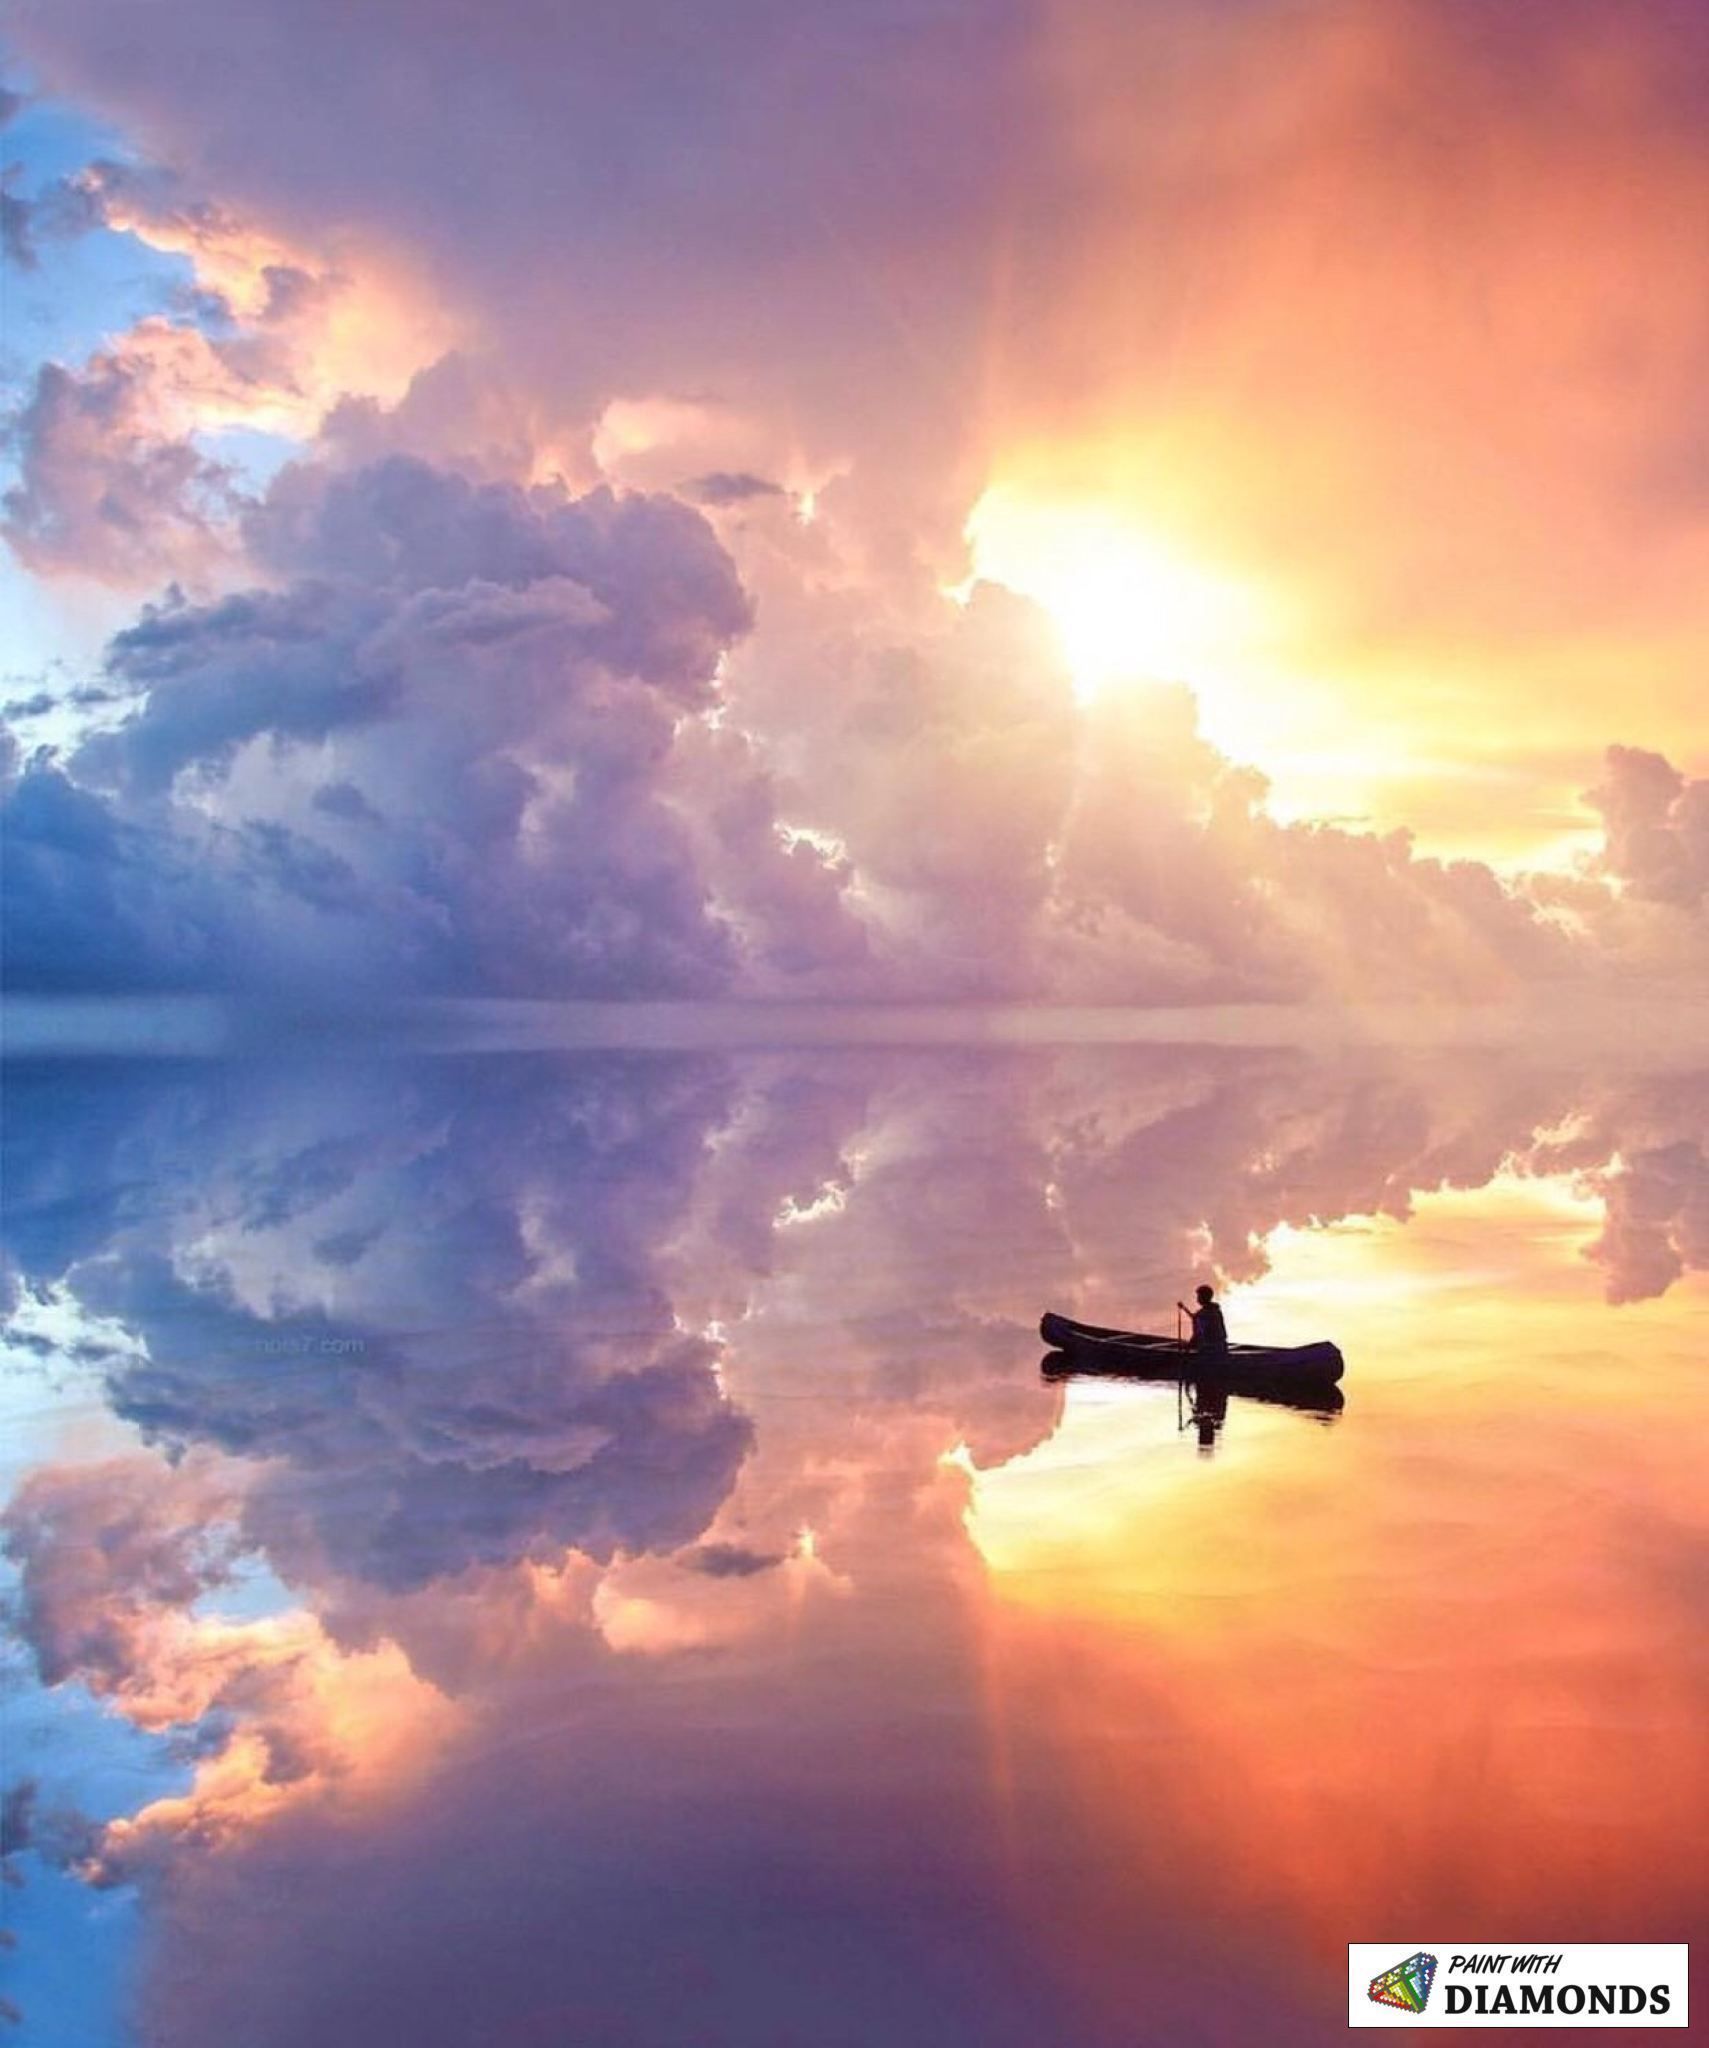 9 beauty Pictures of the sky ideas